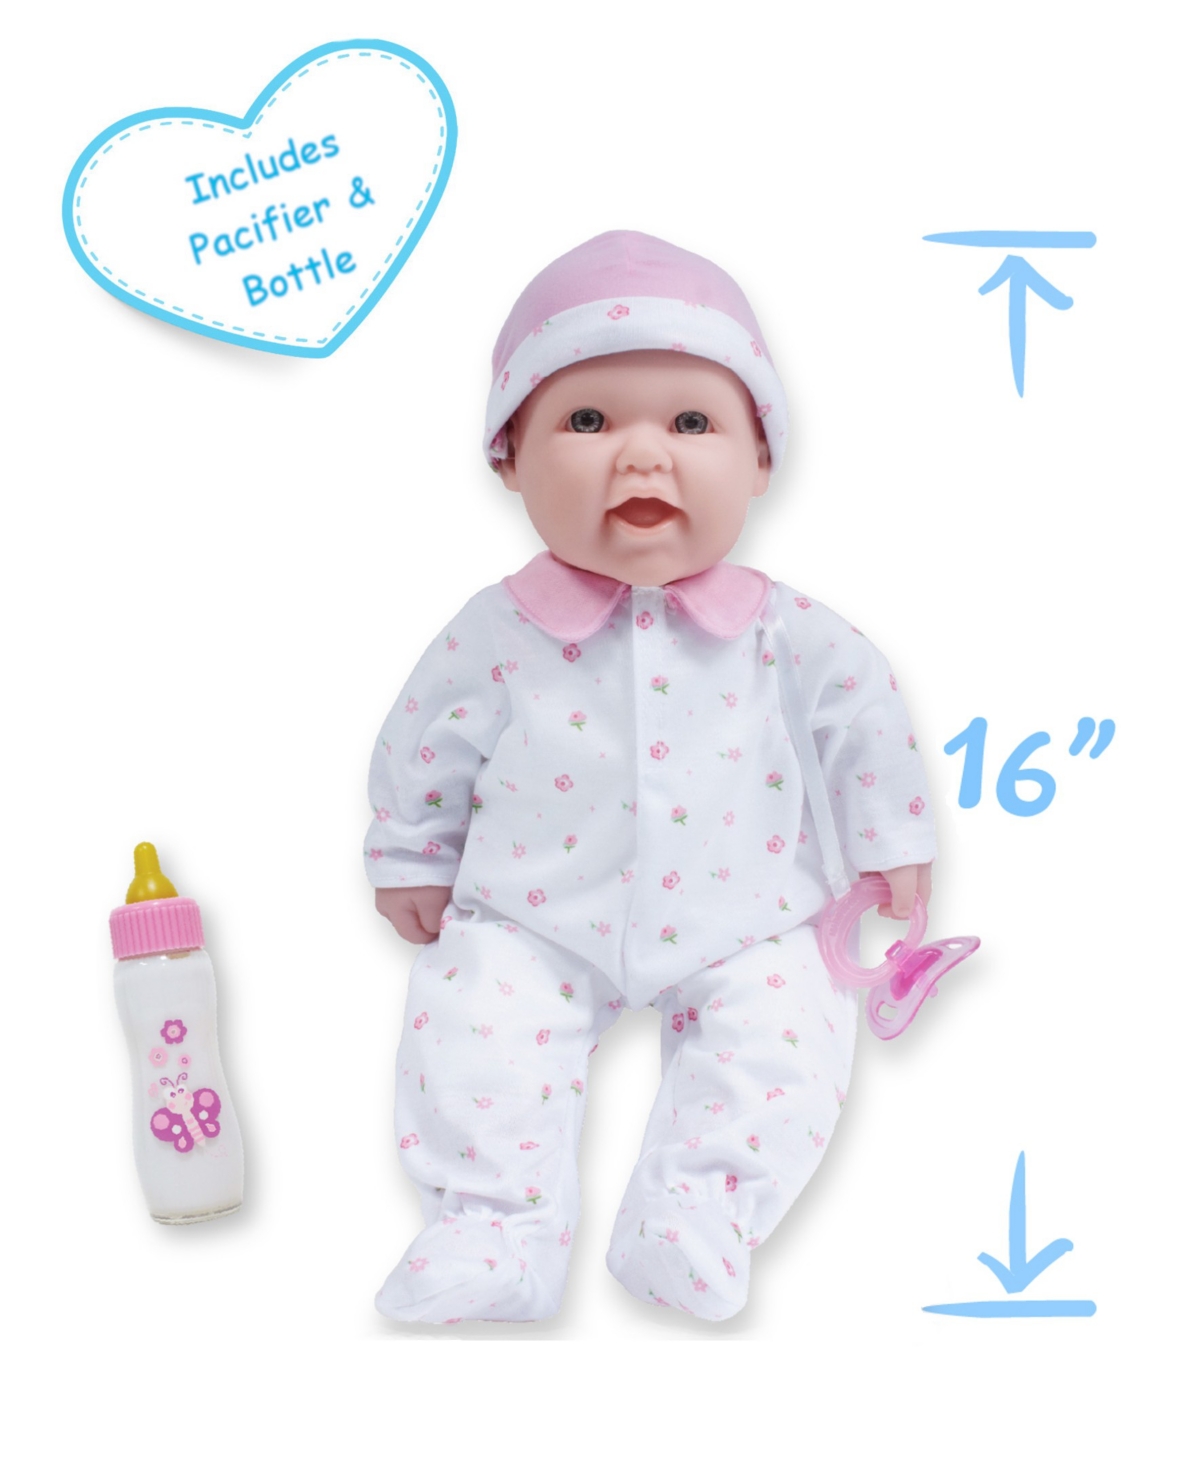 Shop Jc Toys La Baby Caucasian 16" Soft Body Baby Doll Pink Outfit